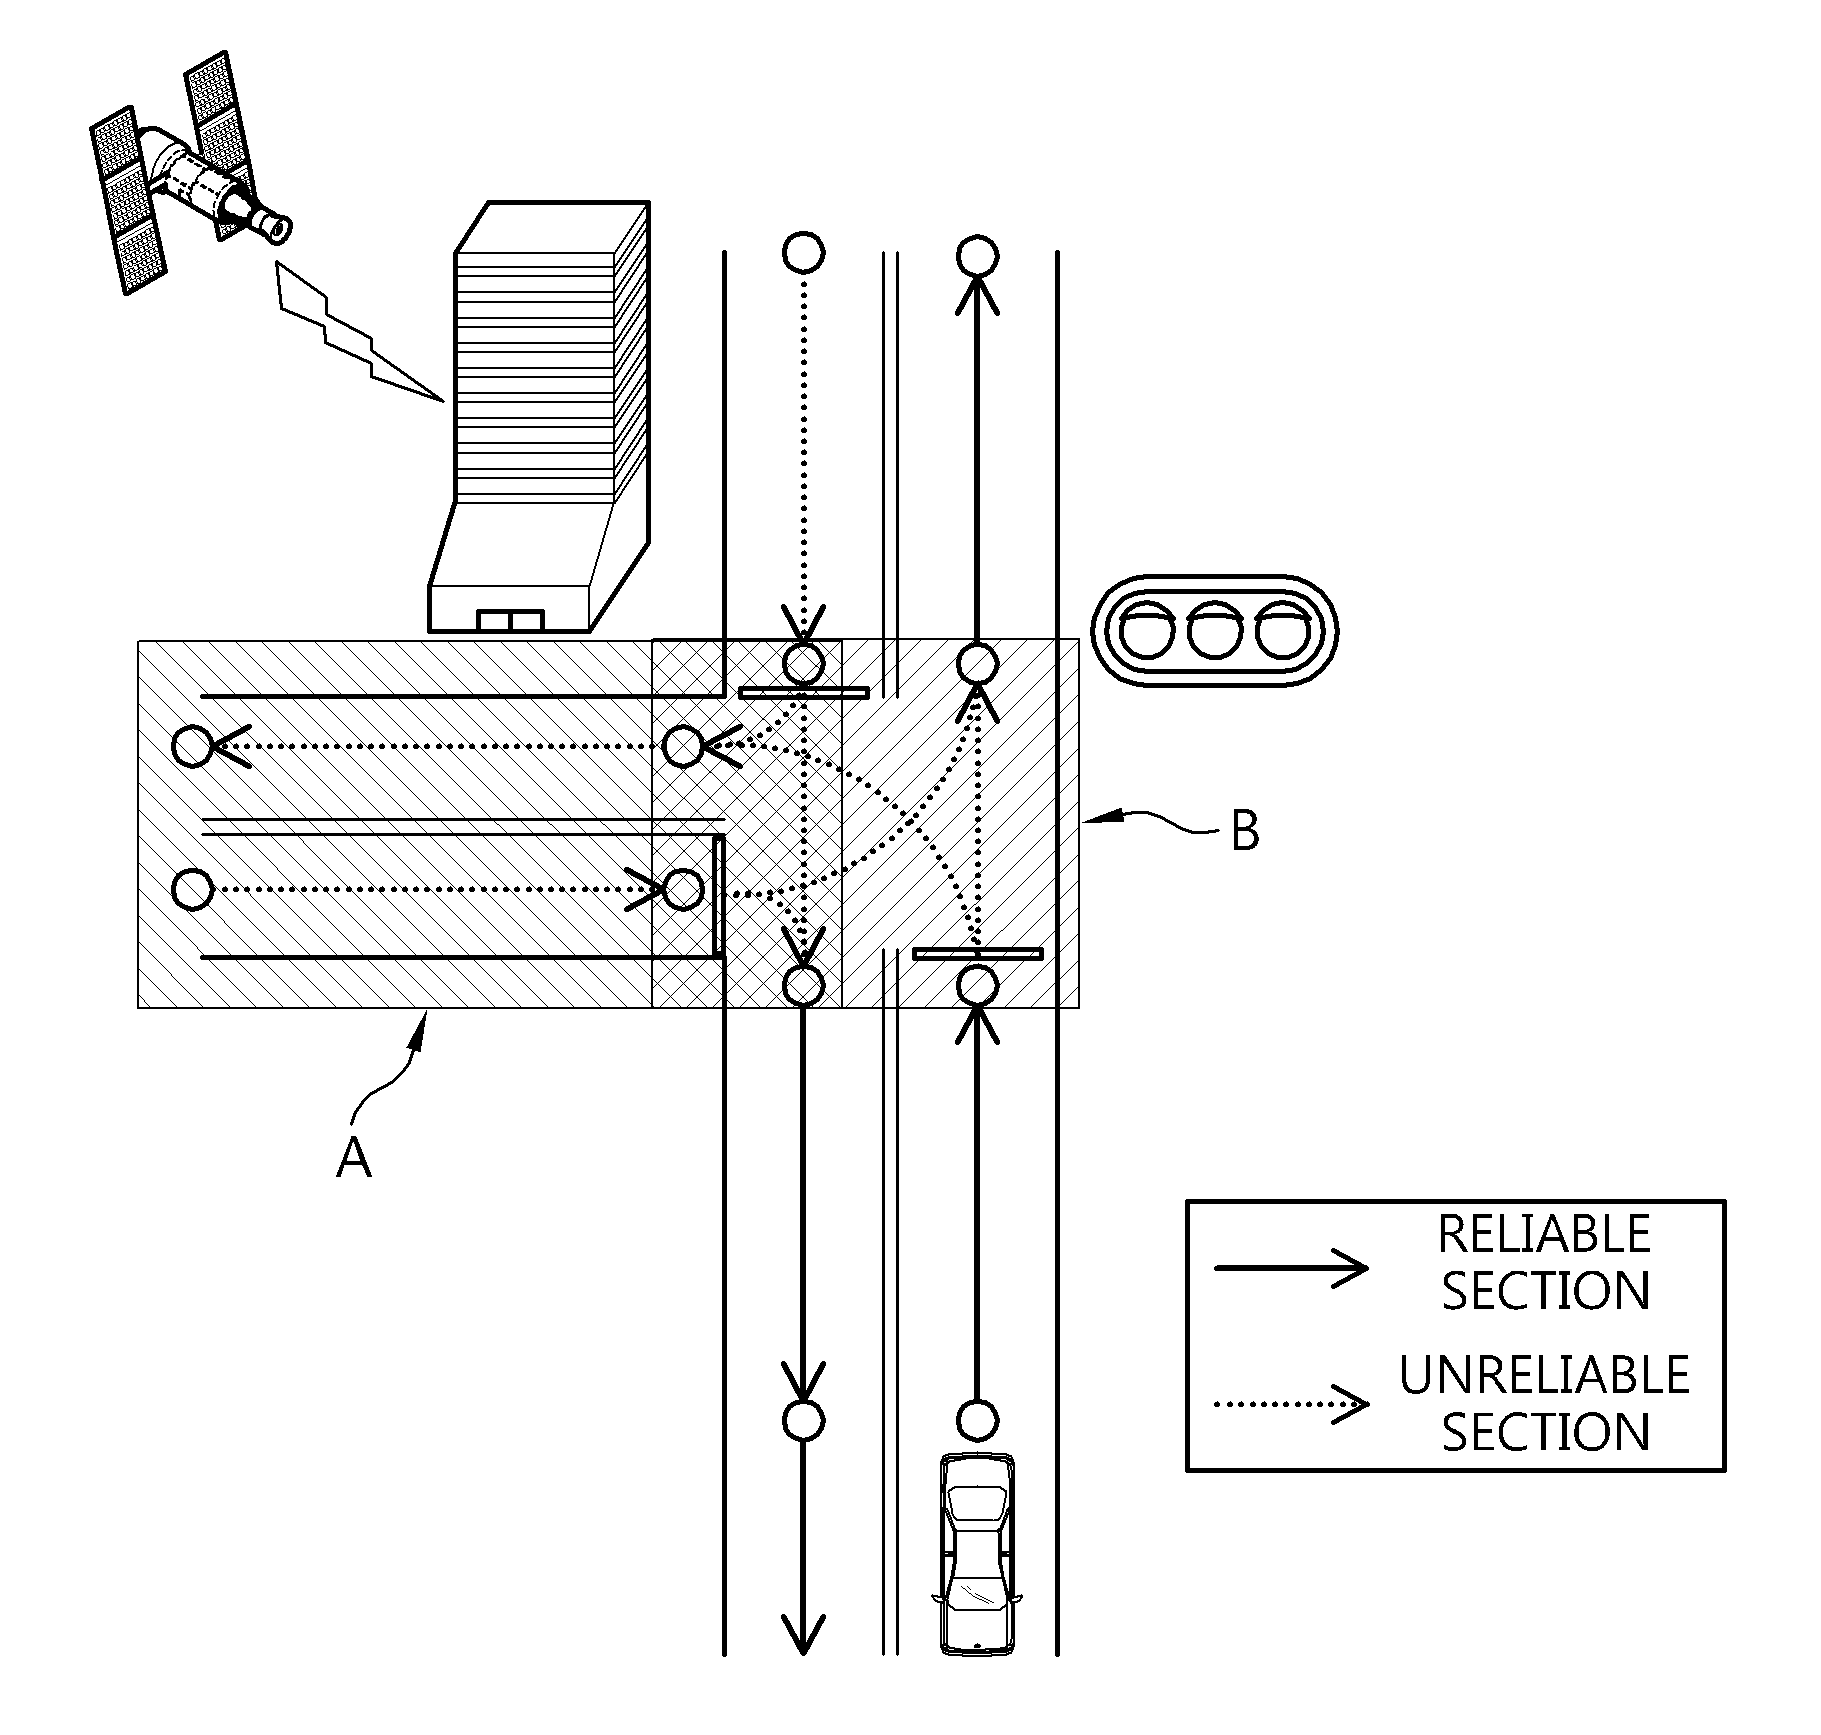 Autonomous driving apparatus and method for vehicle